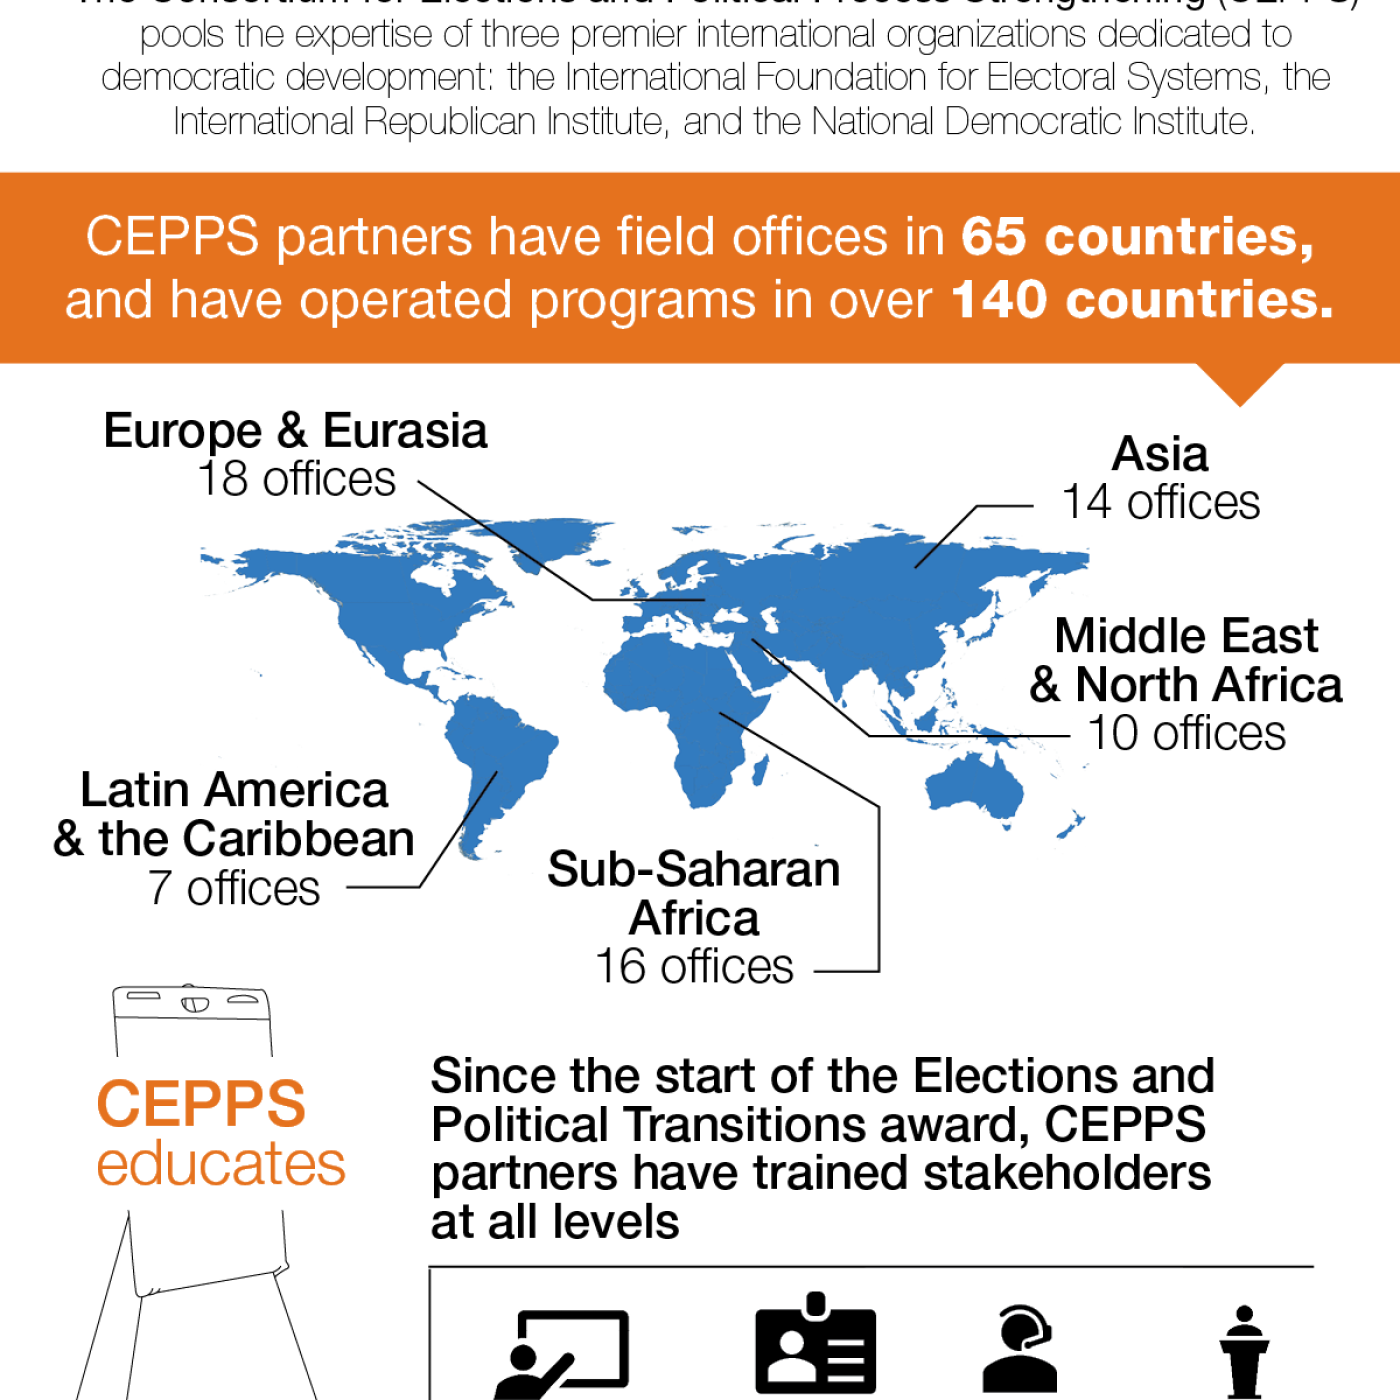 CEPPS partners have field offices in 65 countries, and have operated programs in over 140 countries. Since the start of the Elections and Political Transitions award, CEPPS partners have trained stakeholders at all levels.